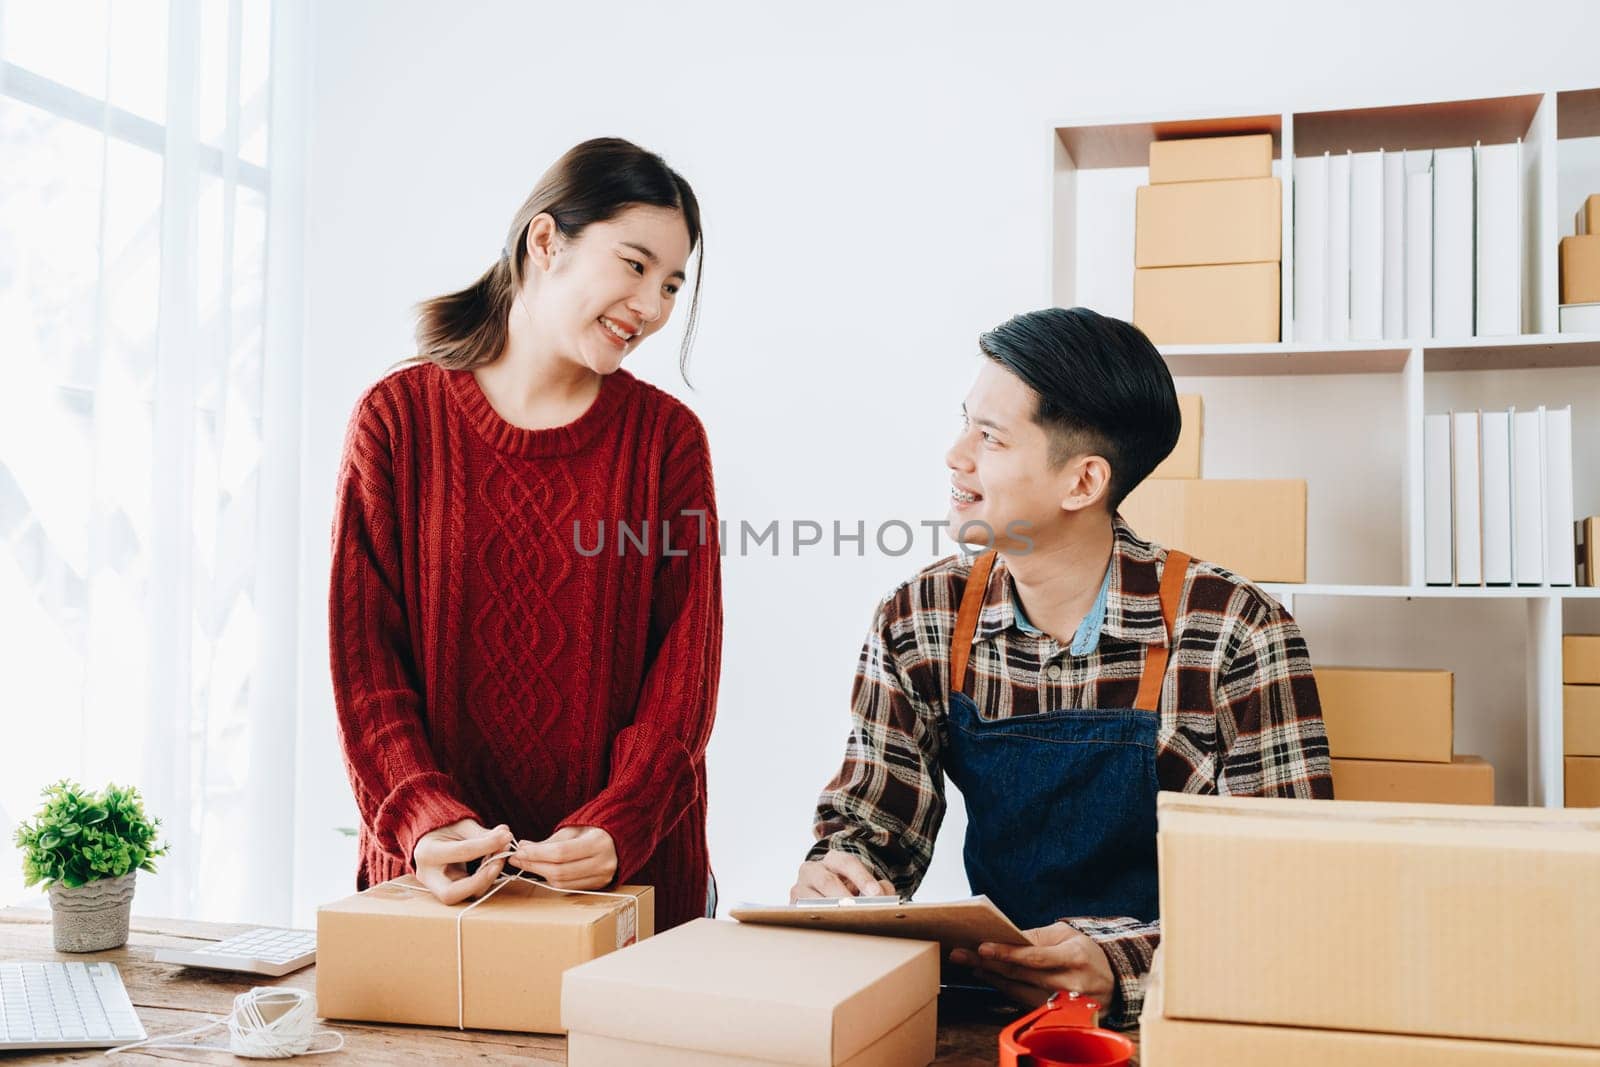 Portrait of Starting small businesses SME owners, family business check online orders Selling products working with boxes freelance work at home office, sme business online small medium enterprise.